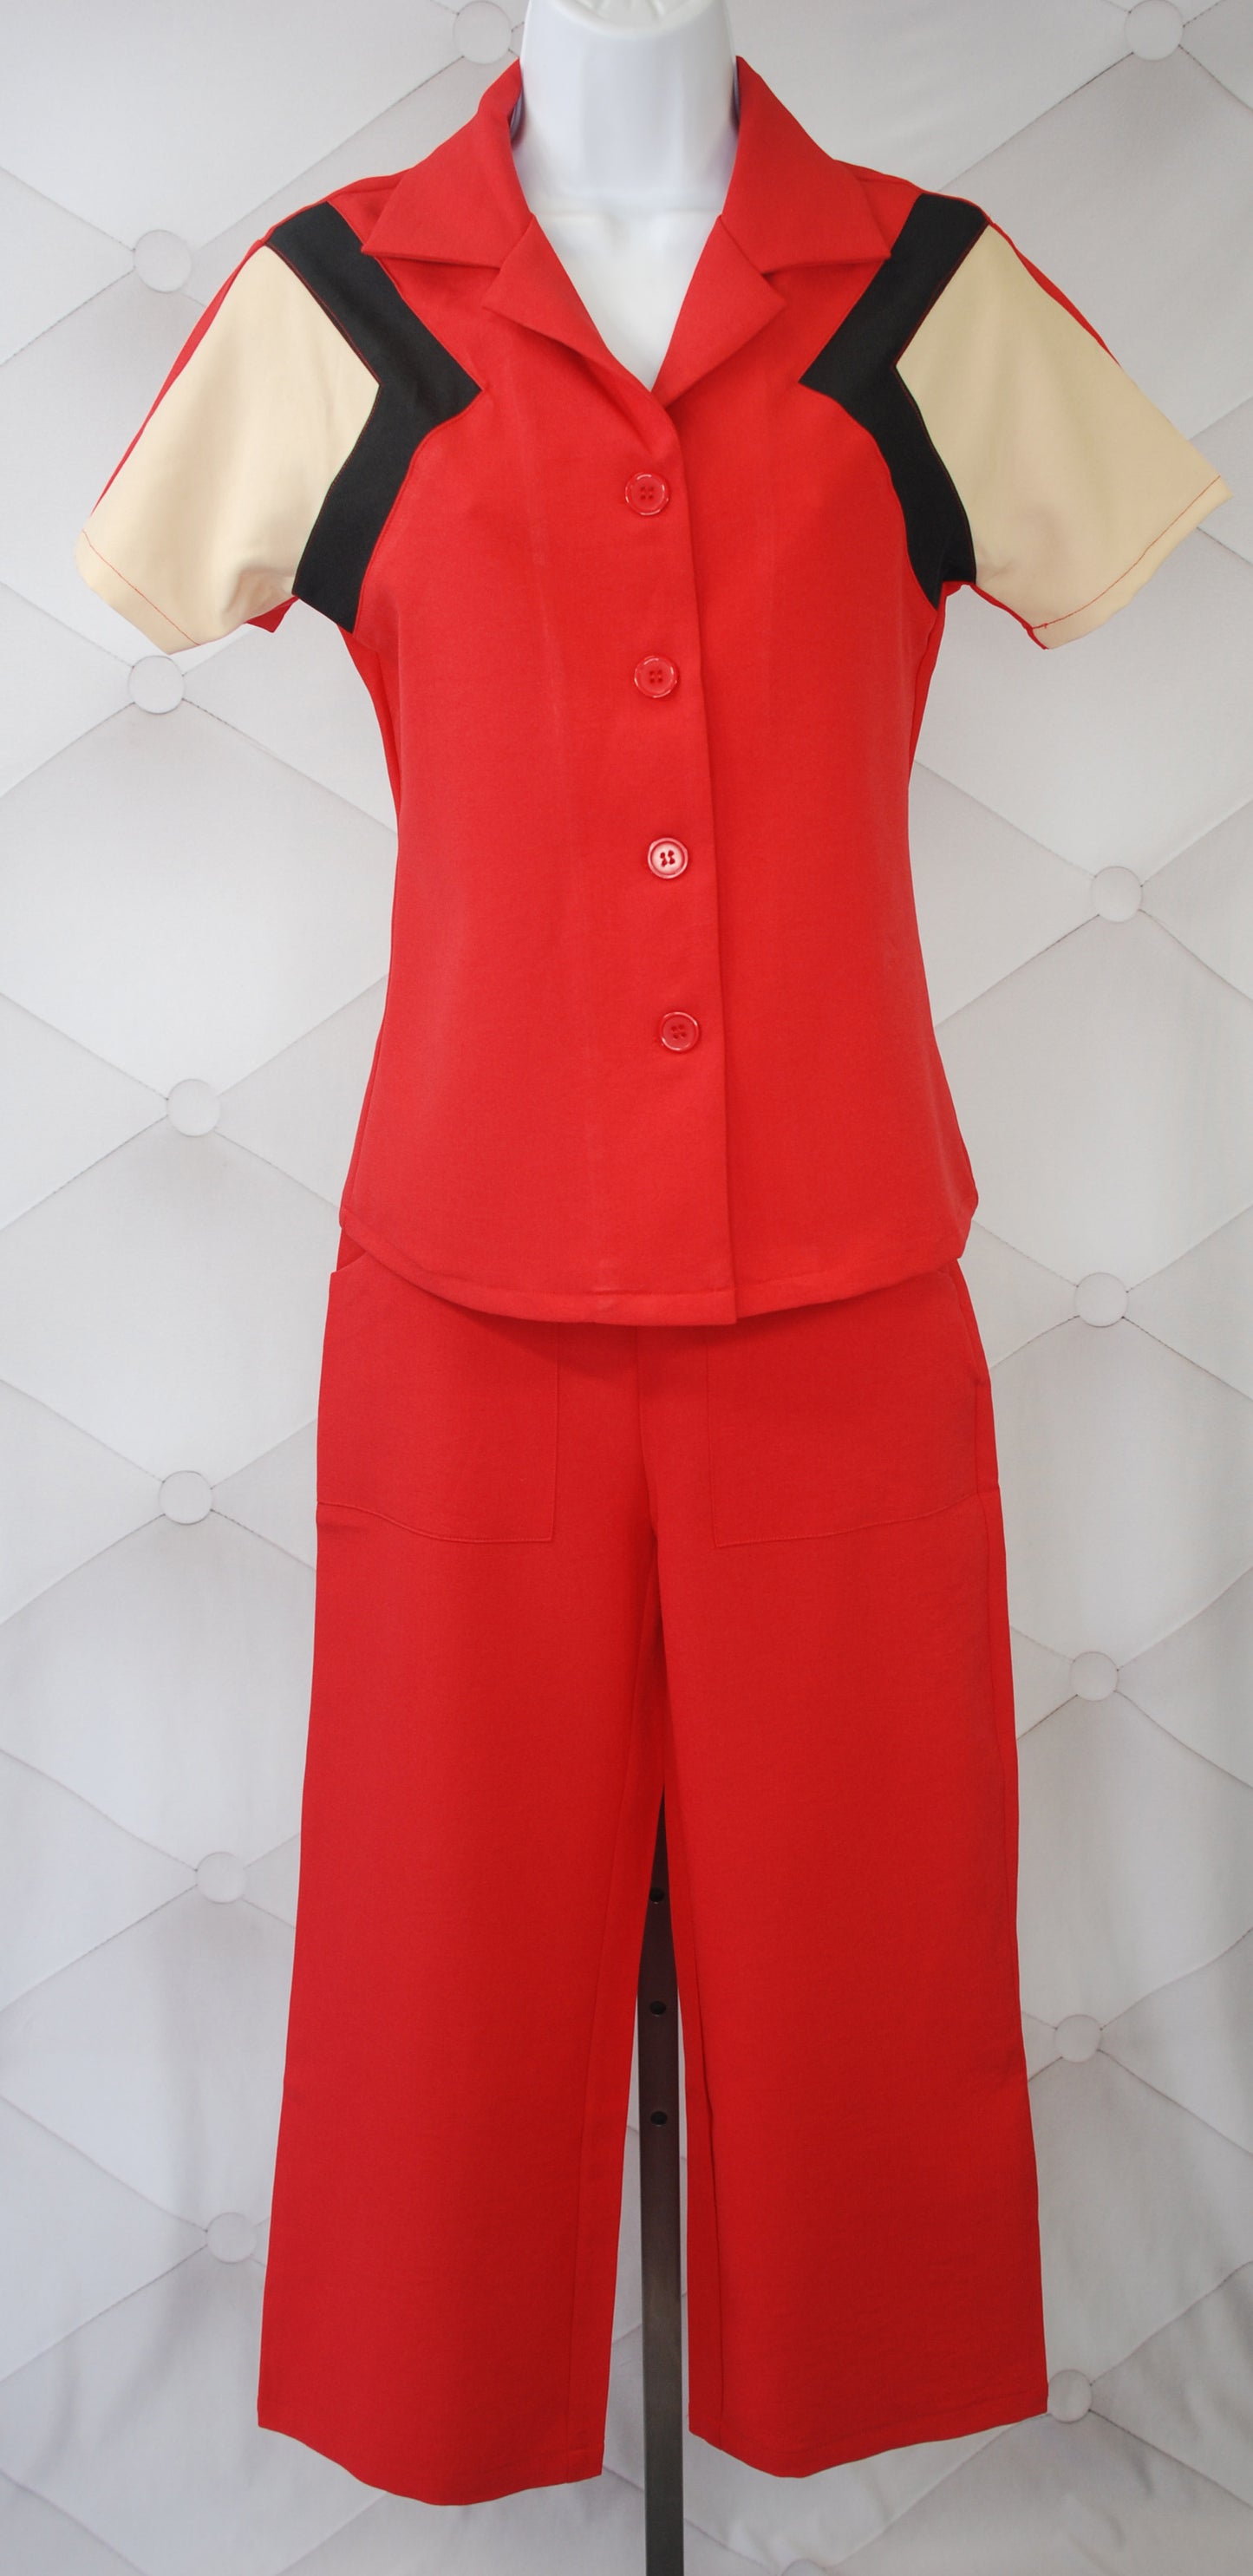 1940s Reproduction Tri-Tone Short Sleeve Work Blouse - Red